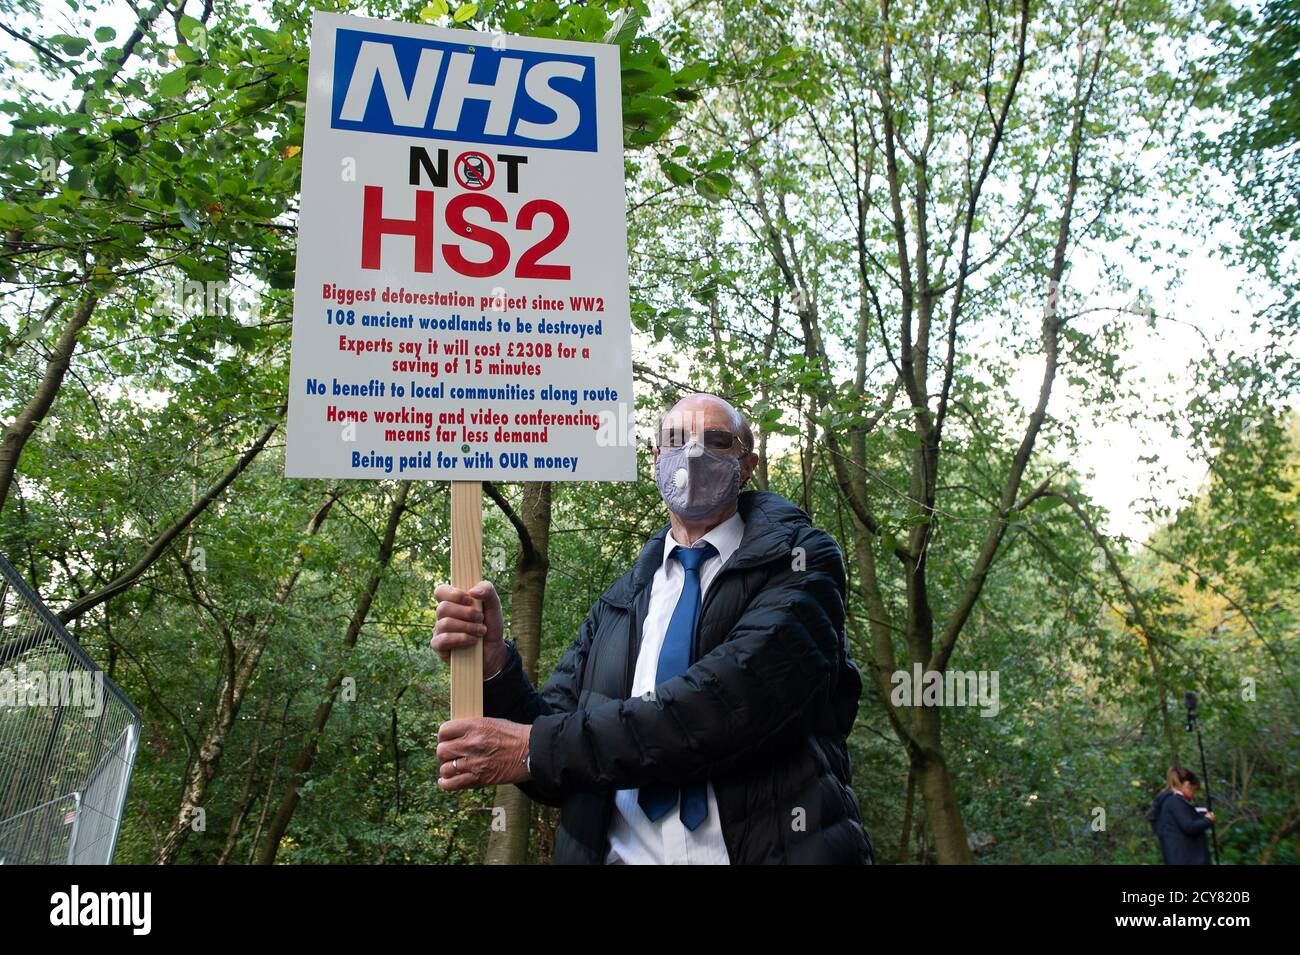 Wendover, UK. 1st October, 2020. A protester holds up an NHS not HS2 sign in the woods. Peaceful tree protectors and environmental campaigners at the Stop HS2 Jones Hill Protection Camp were being evicted today from their homes in the trees by the National Eviction Team Enforcement Agents working on behalf of HS2 Ltd. The over budget and controversial HS2 High Speed Rail link from London to Birmingham project puts 108 ancient woodlands, 693 wildlife sites and 33 SSSIs at risk of damage or destruction. Maureen McLean/Alamy Live News Stock Photo